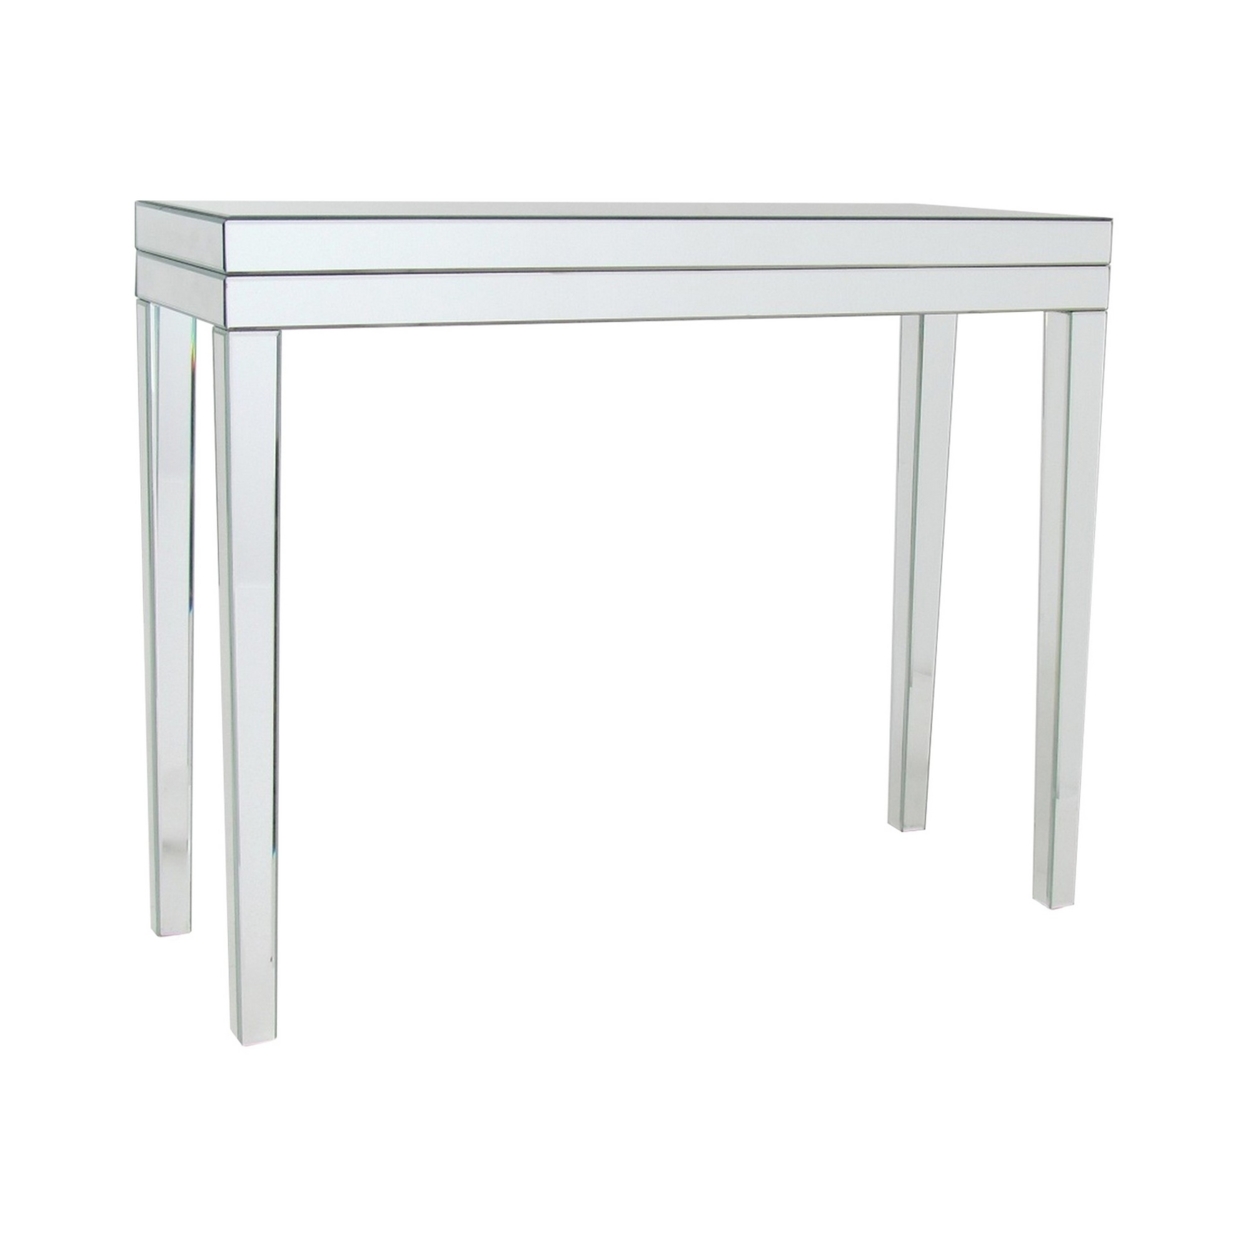 Rectangular Mirrored Console Table With Wooden Frame, Silver- Saltoro Sherpi